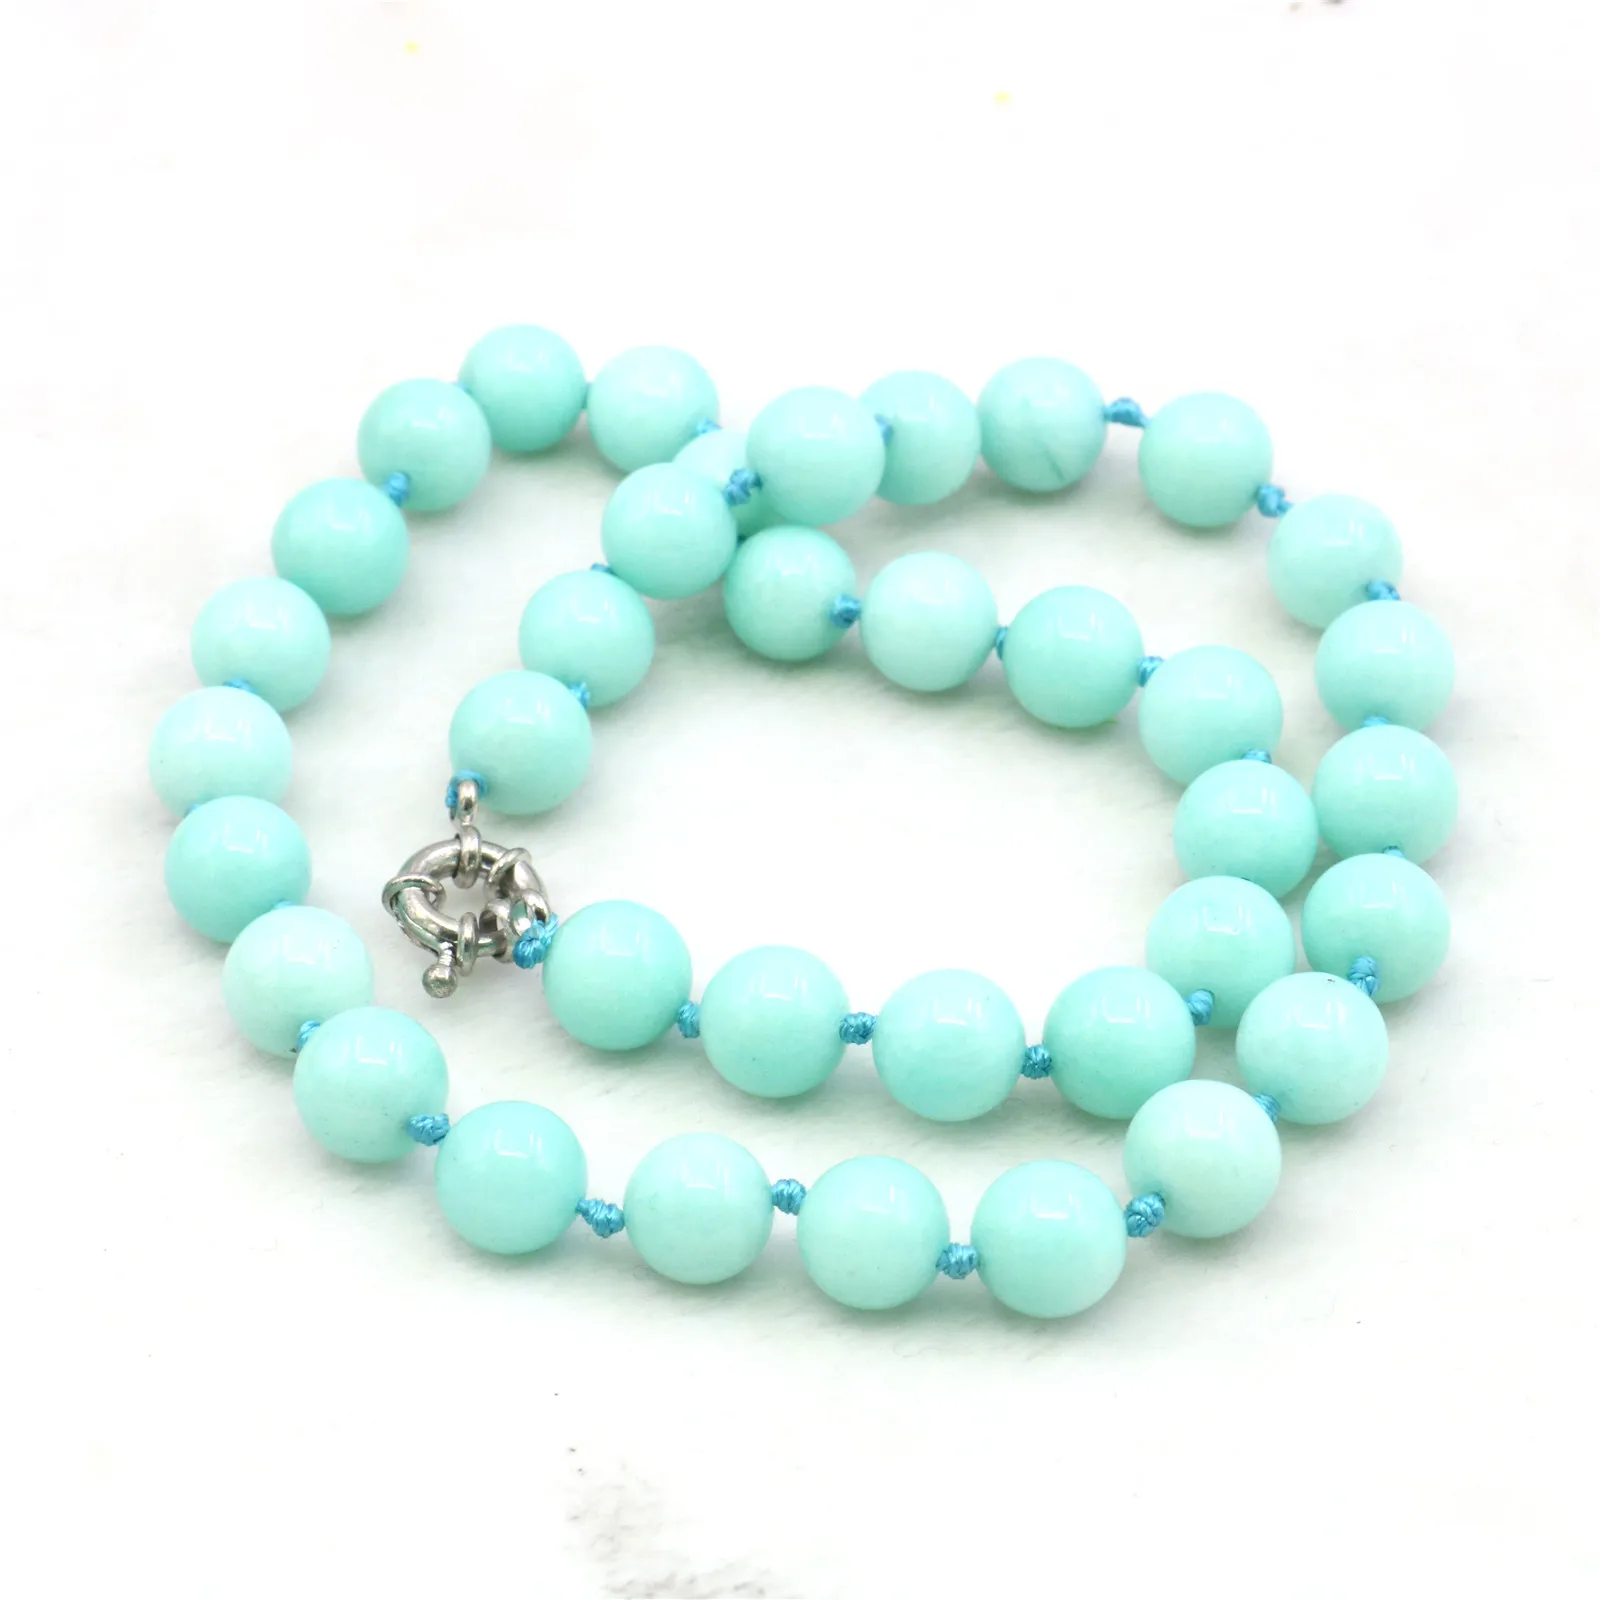 

10mm Round Sky Blue Jades Chalcedony Necklace Natural Stone Hand Made Women Neckwear DIY Fashion Jewelry Making Design